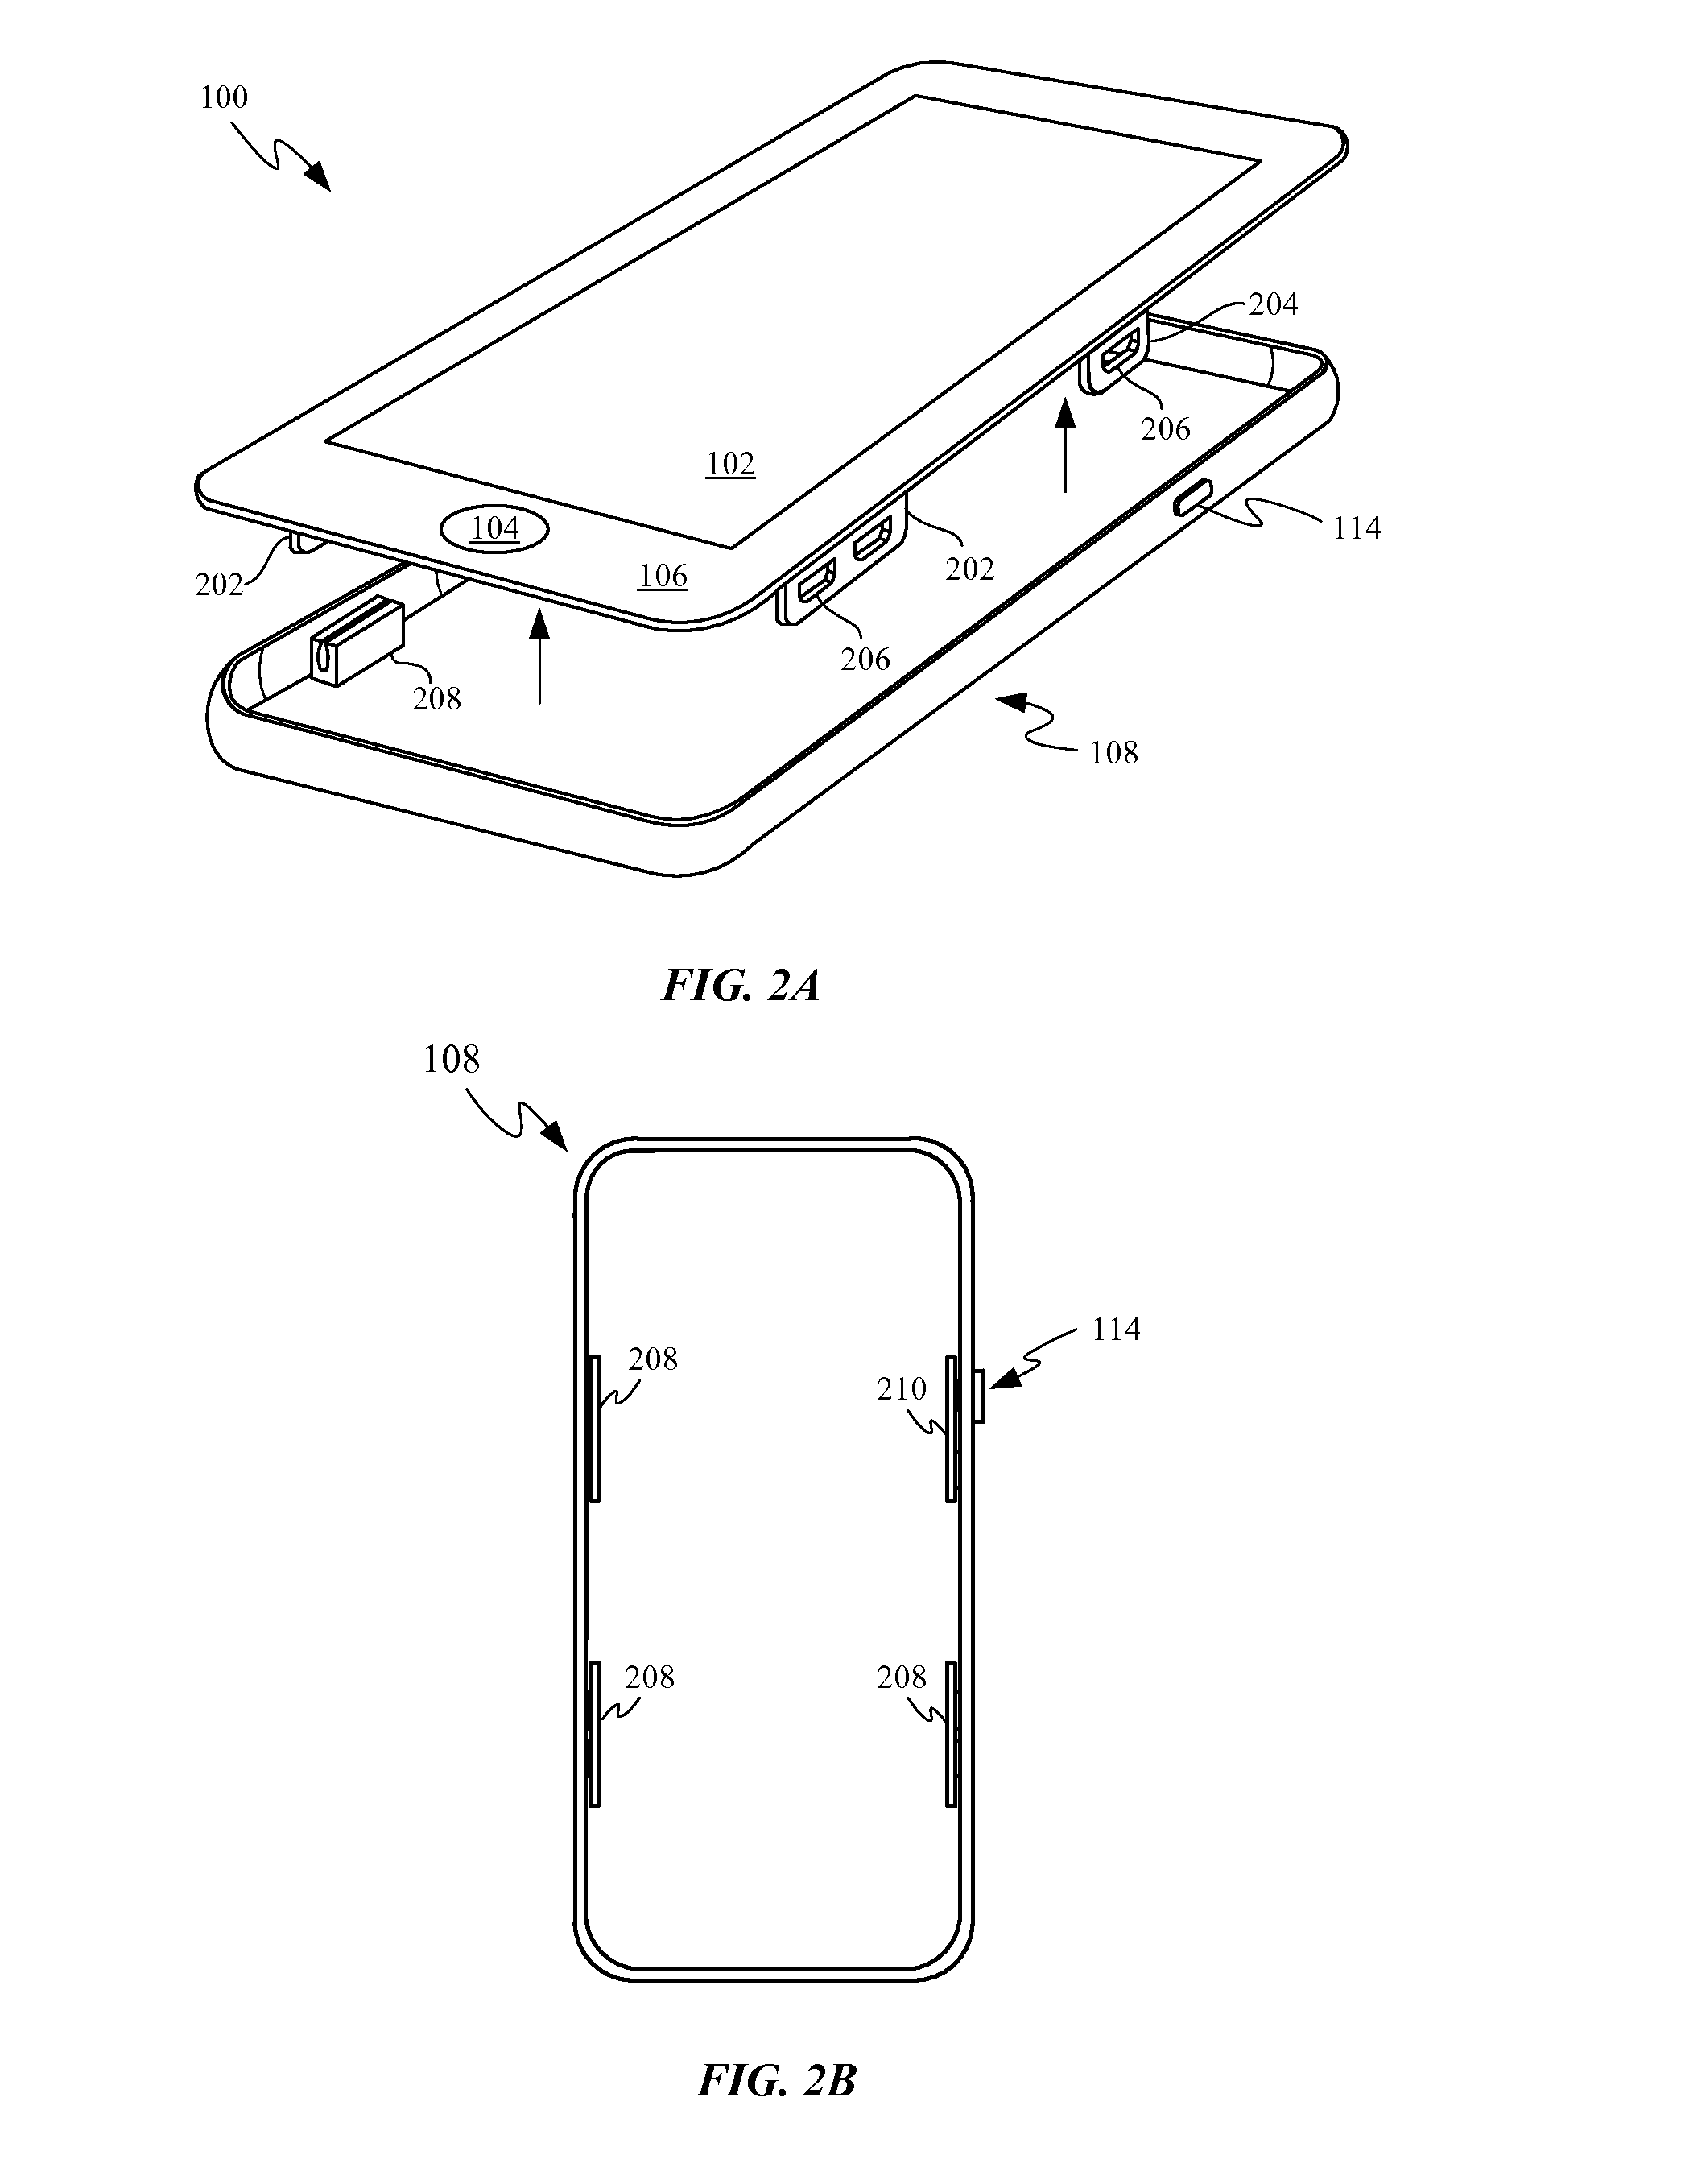 Button integration for an electronic device